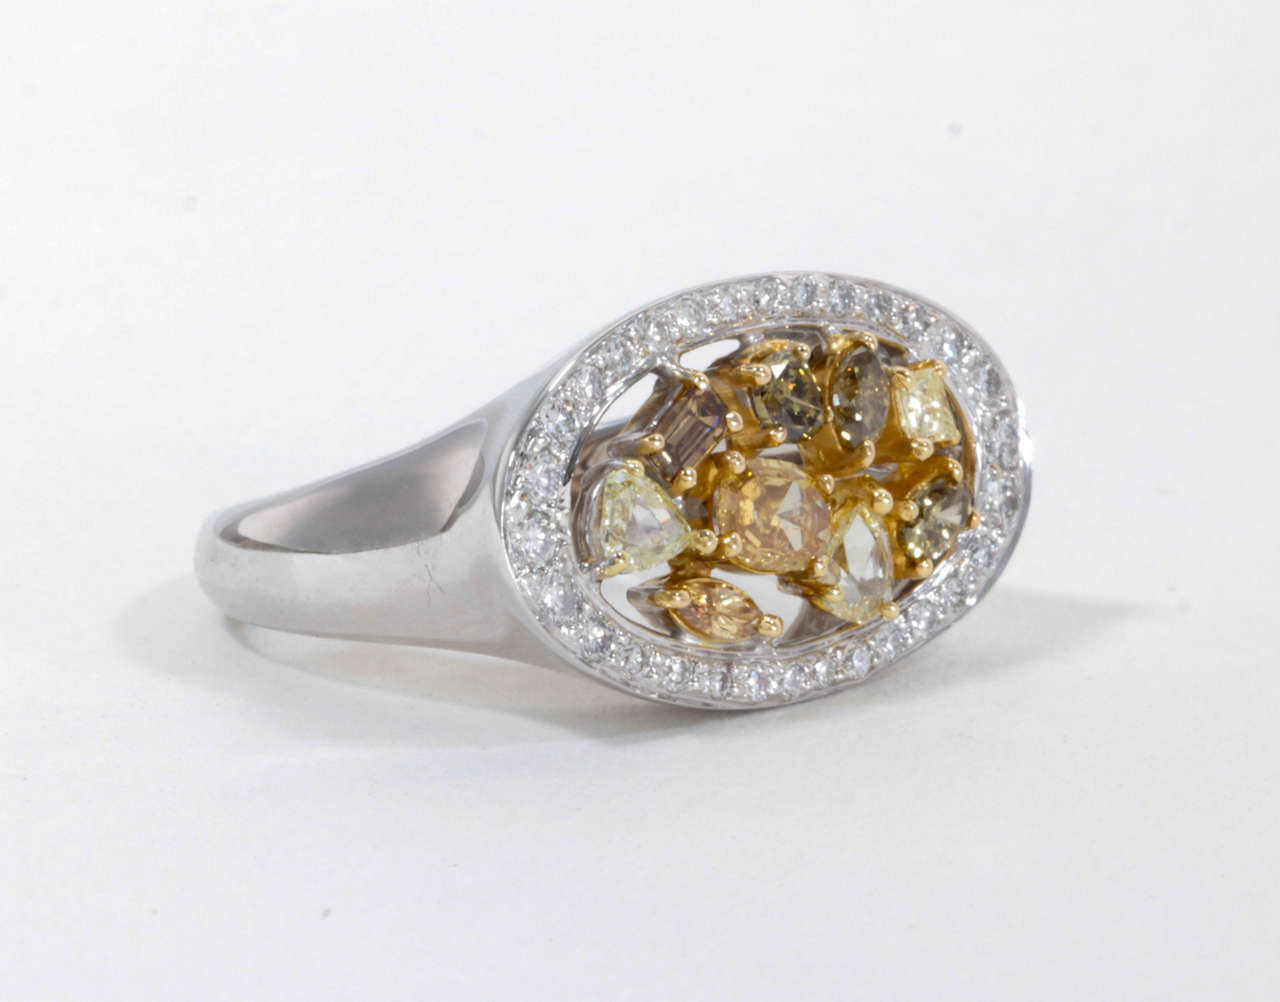 A unique and fun ring to add to any collection.

1.31 carats of Fancy yellow, cognac, champagne and white diamonds set in 18k gold.